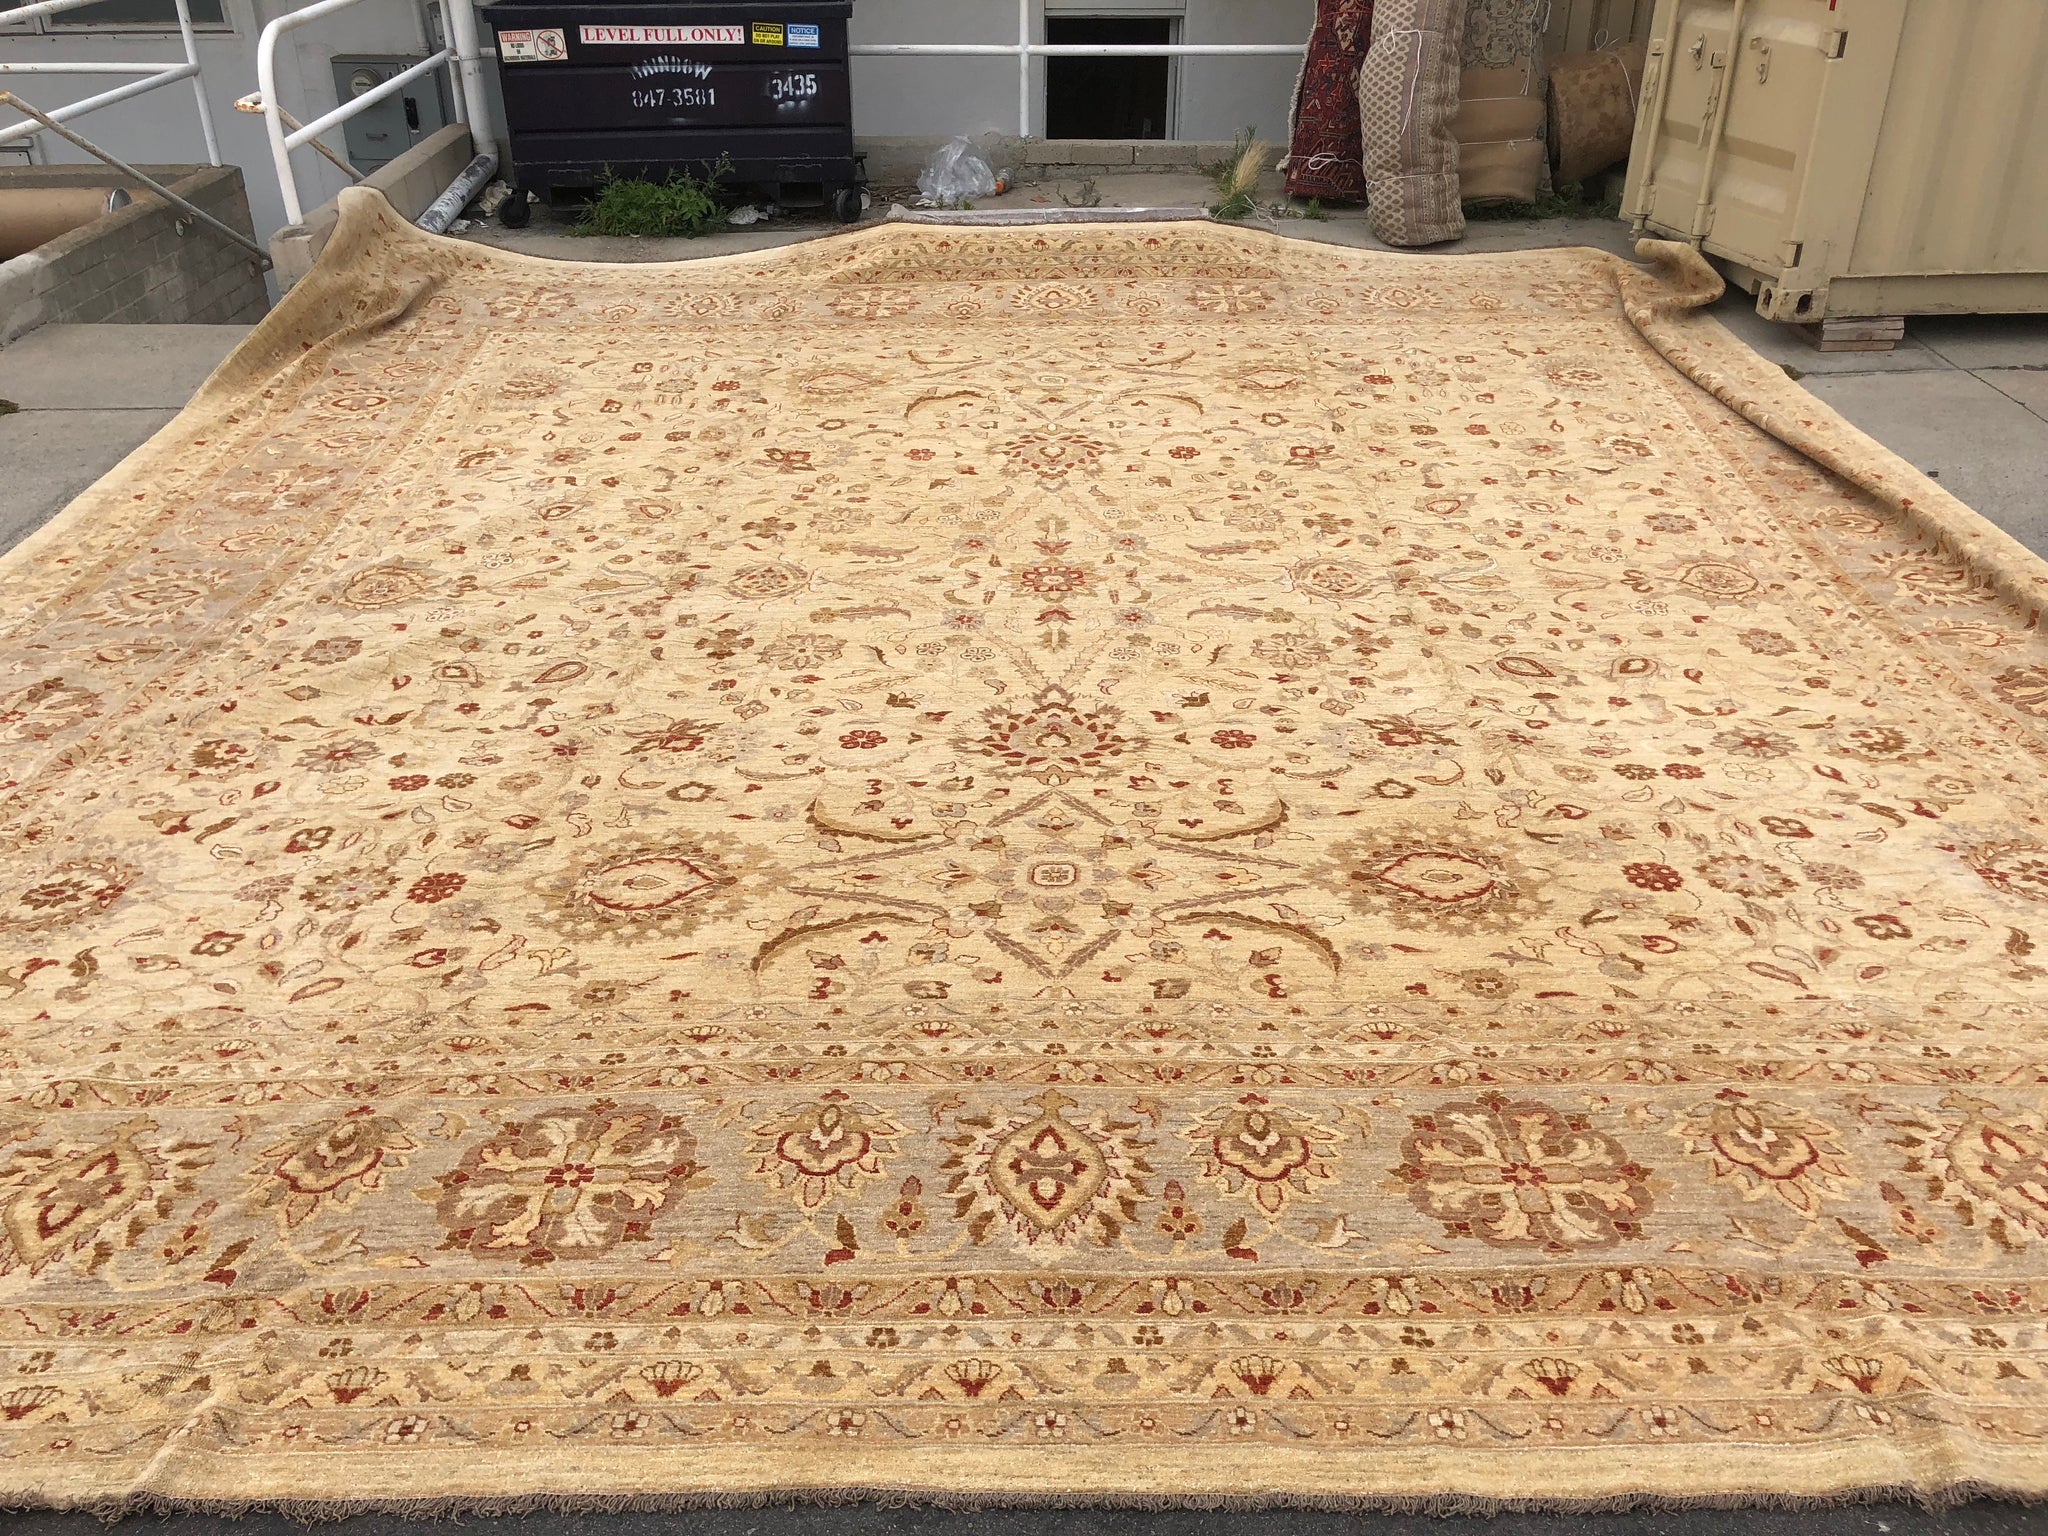 Rug Is:75170  Persian sultanabad des 20x20 ft